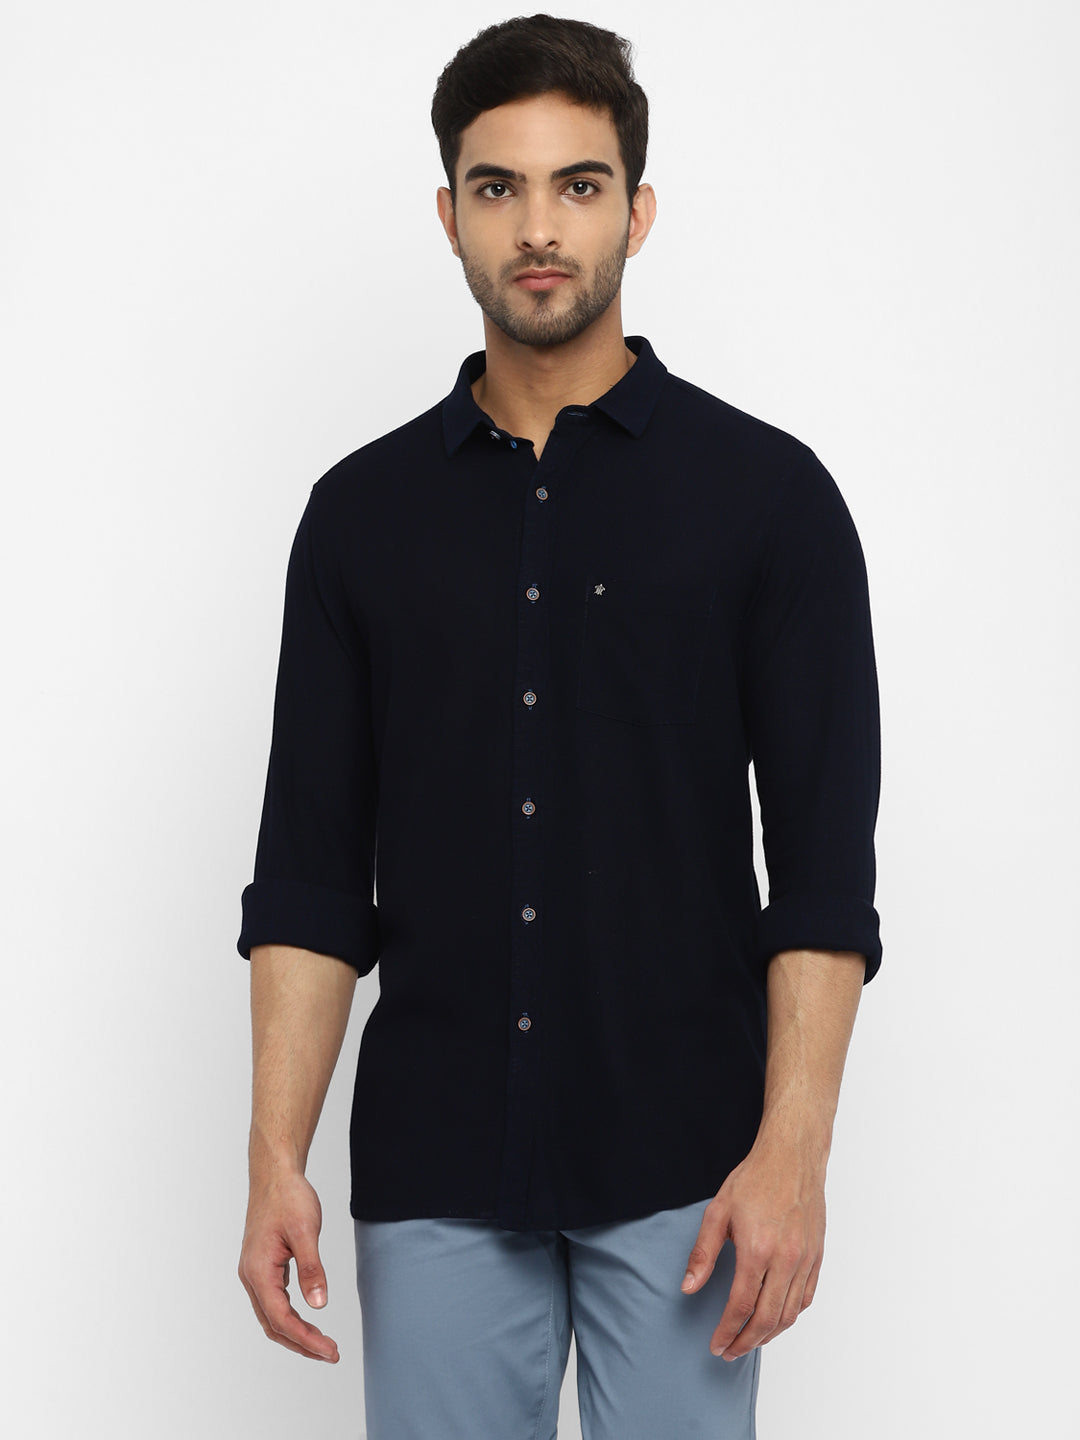 Knitted Navy Blue Dobby Ultra Slim Fit Full Sleeve Casual Shirt